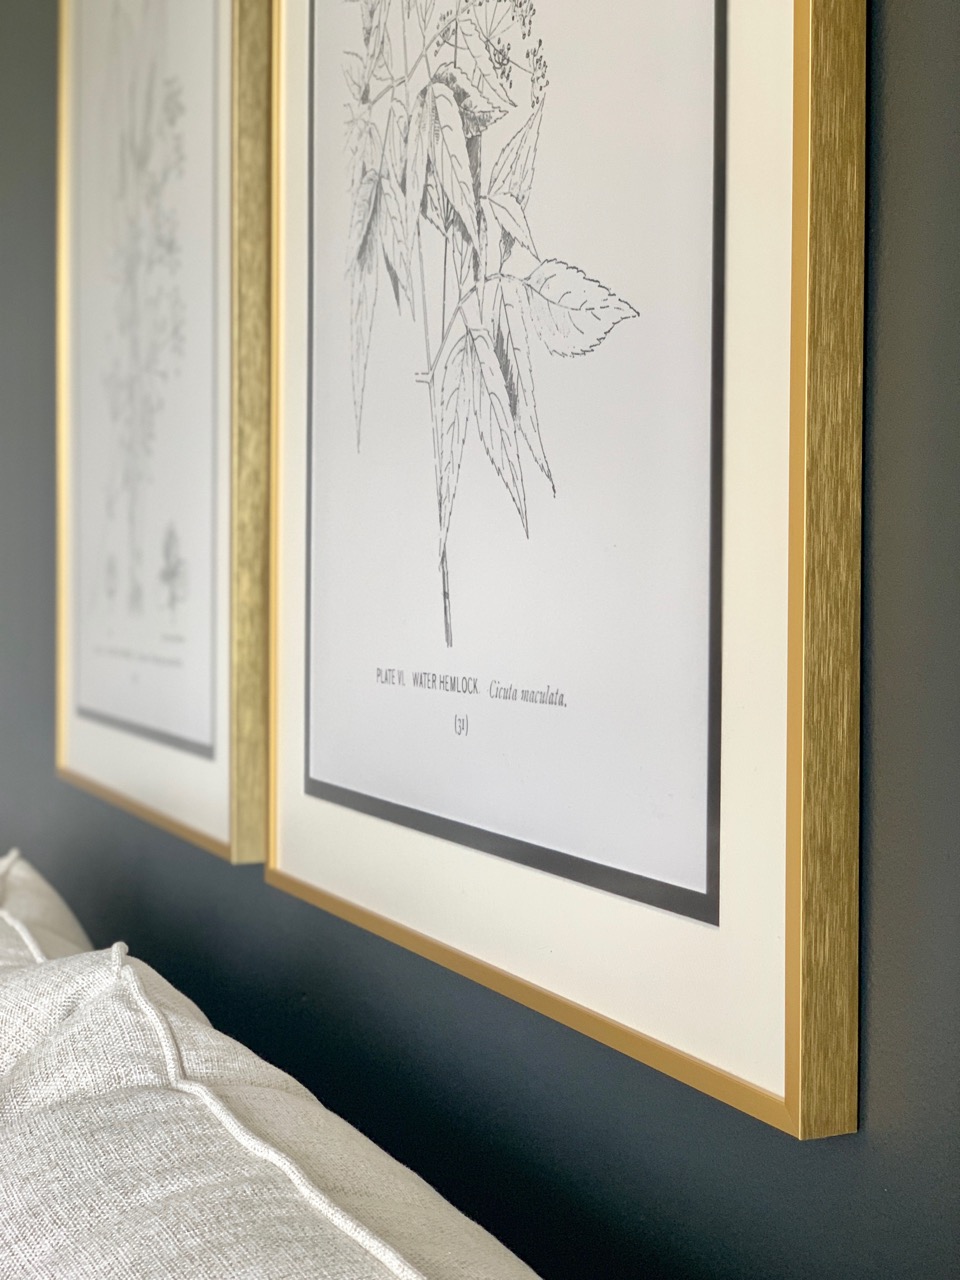 Choosing The Perfect Matboard Color For Your Custom Framing Project